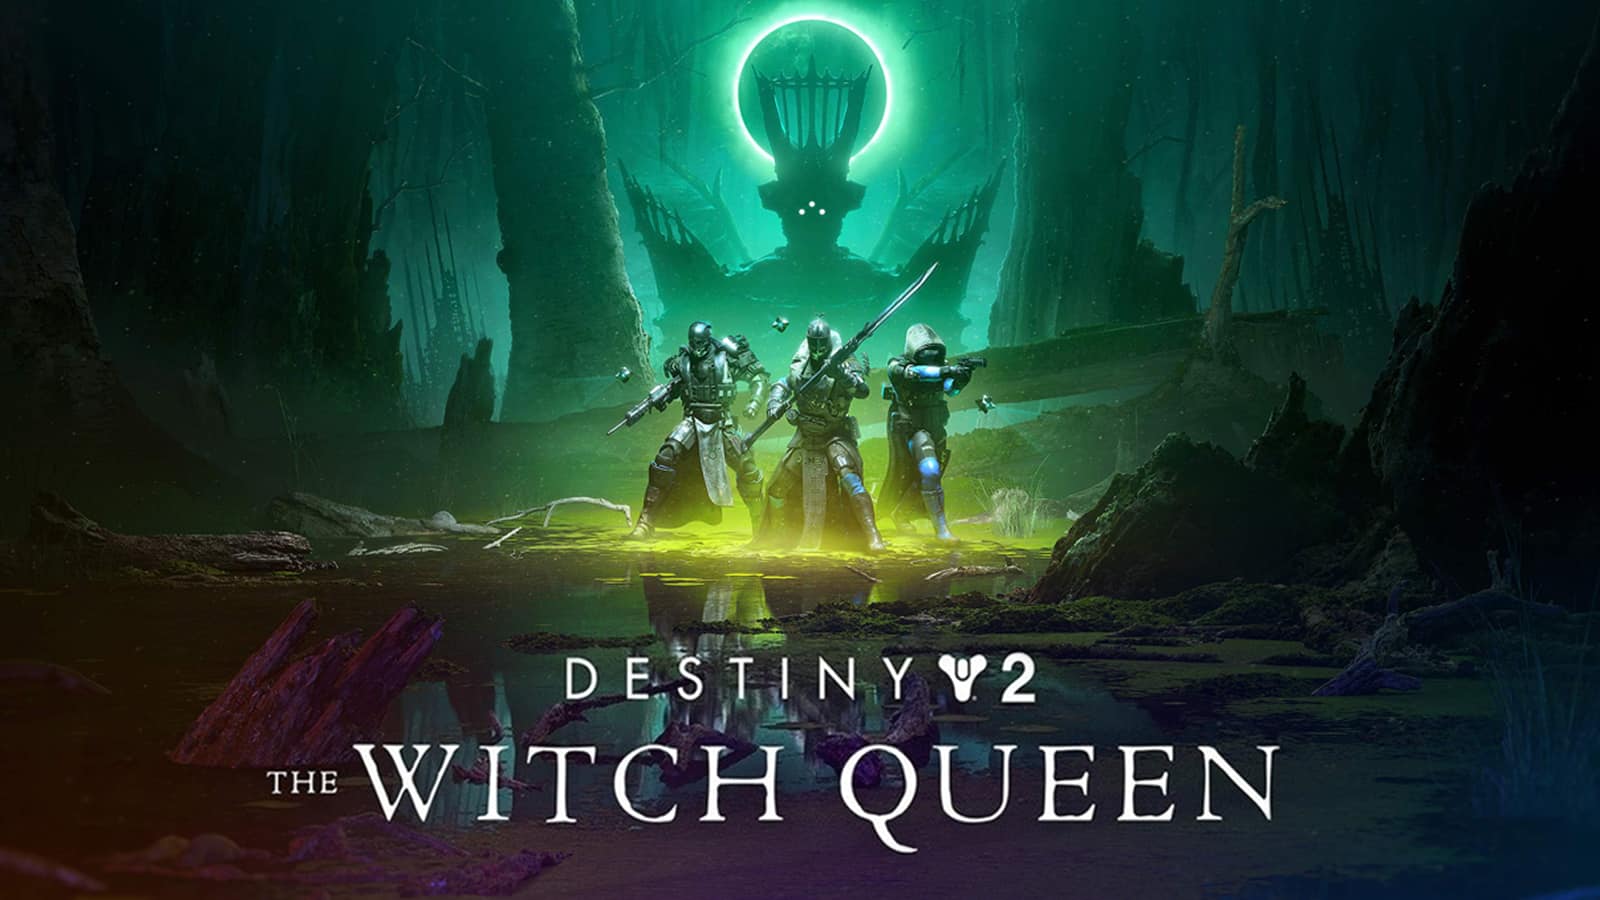 Destiny 2 The Witch Queen Expansion Release Date Savathun Story Trailer Bocor Lainnya